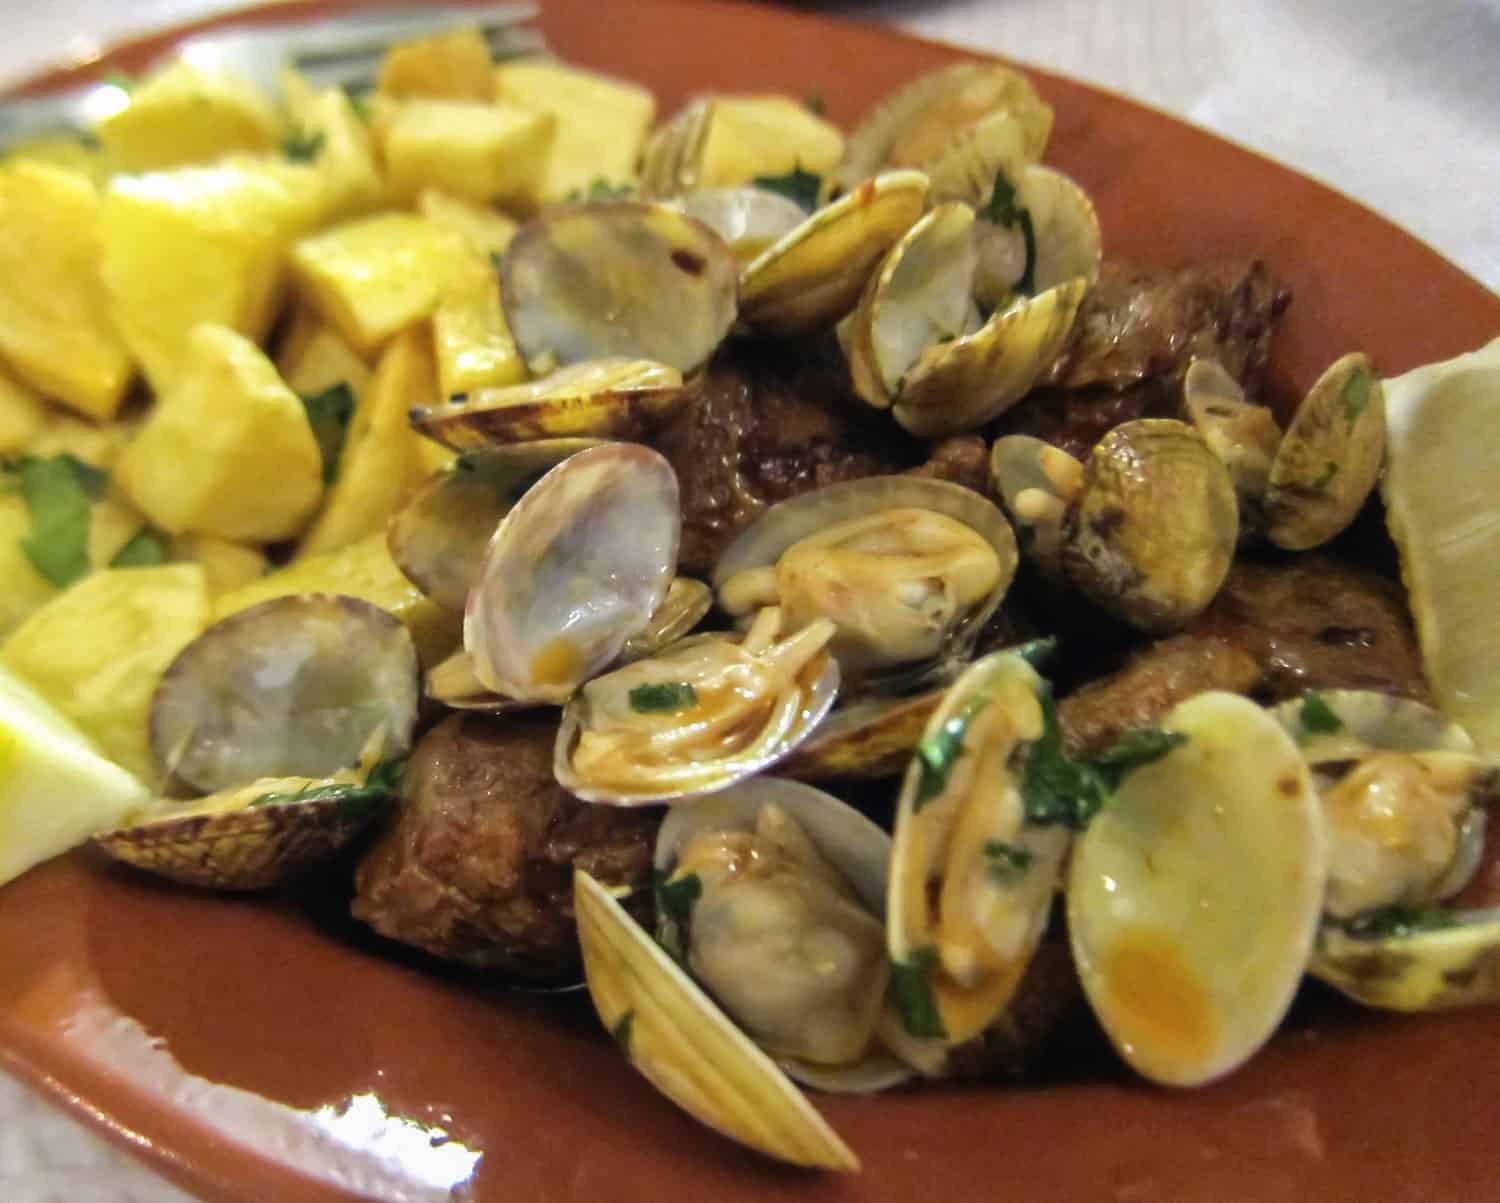 Carne de Porco Alentejana is a traditional food in Lisbon you don't want to miss, discover the other Portuguese food you should eat.